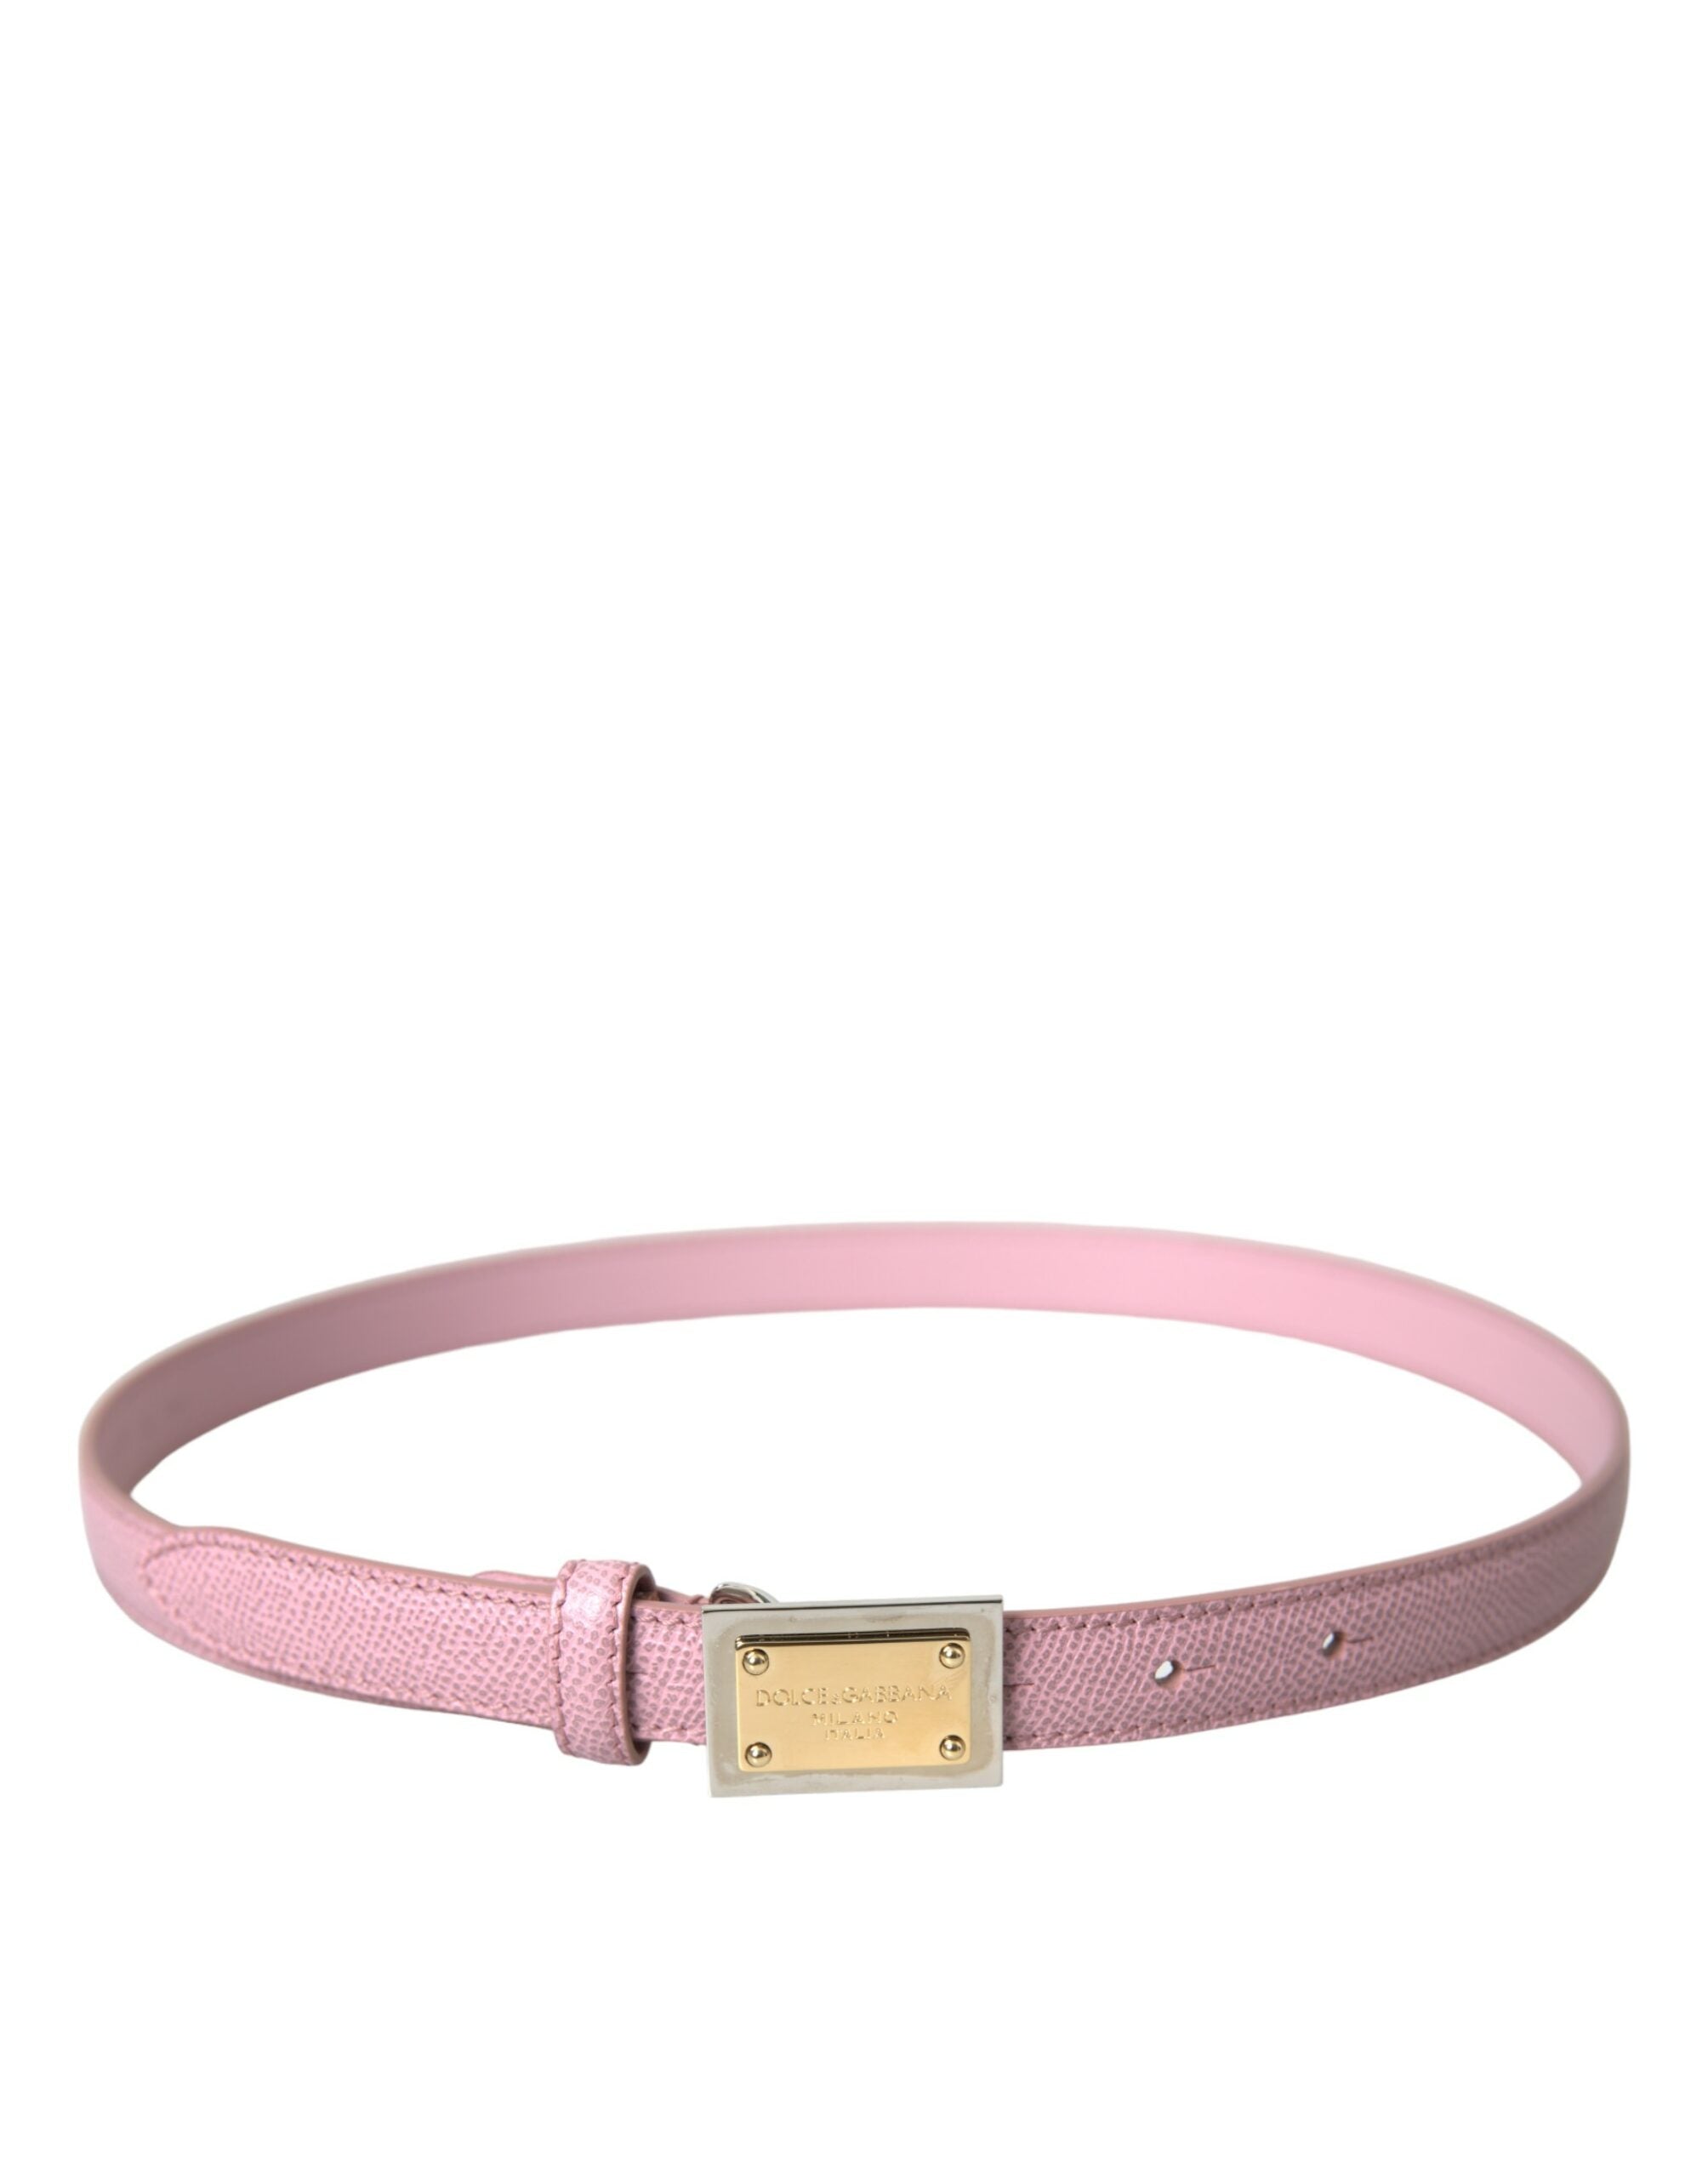 Pink Leather Gold Square Metal Buckle Belt - Divitiae Glamour